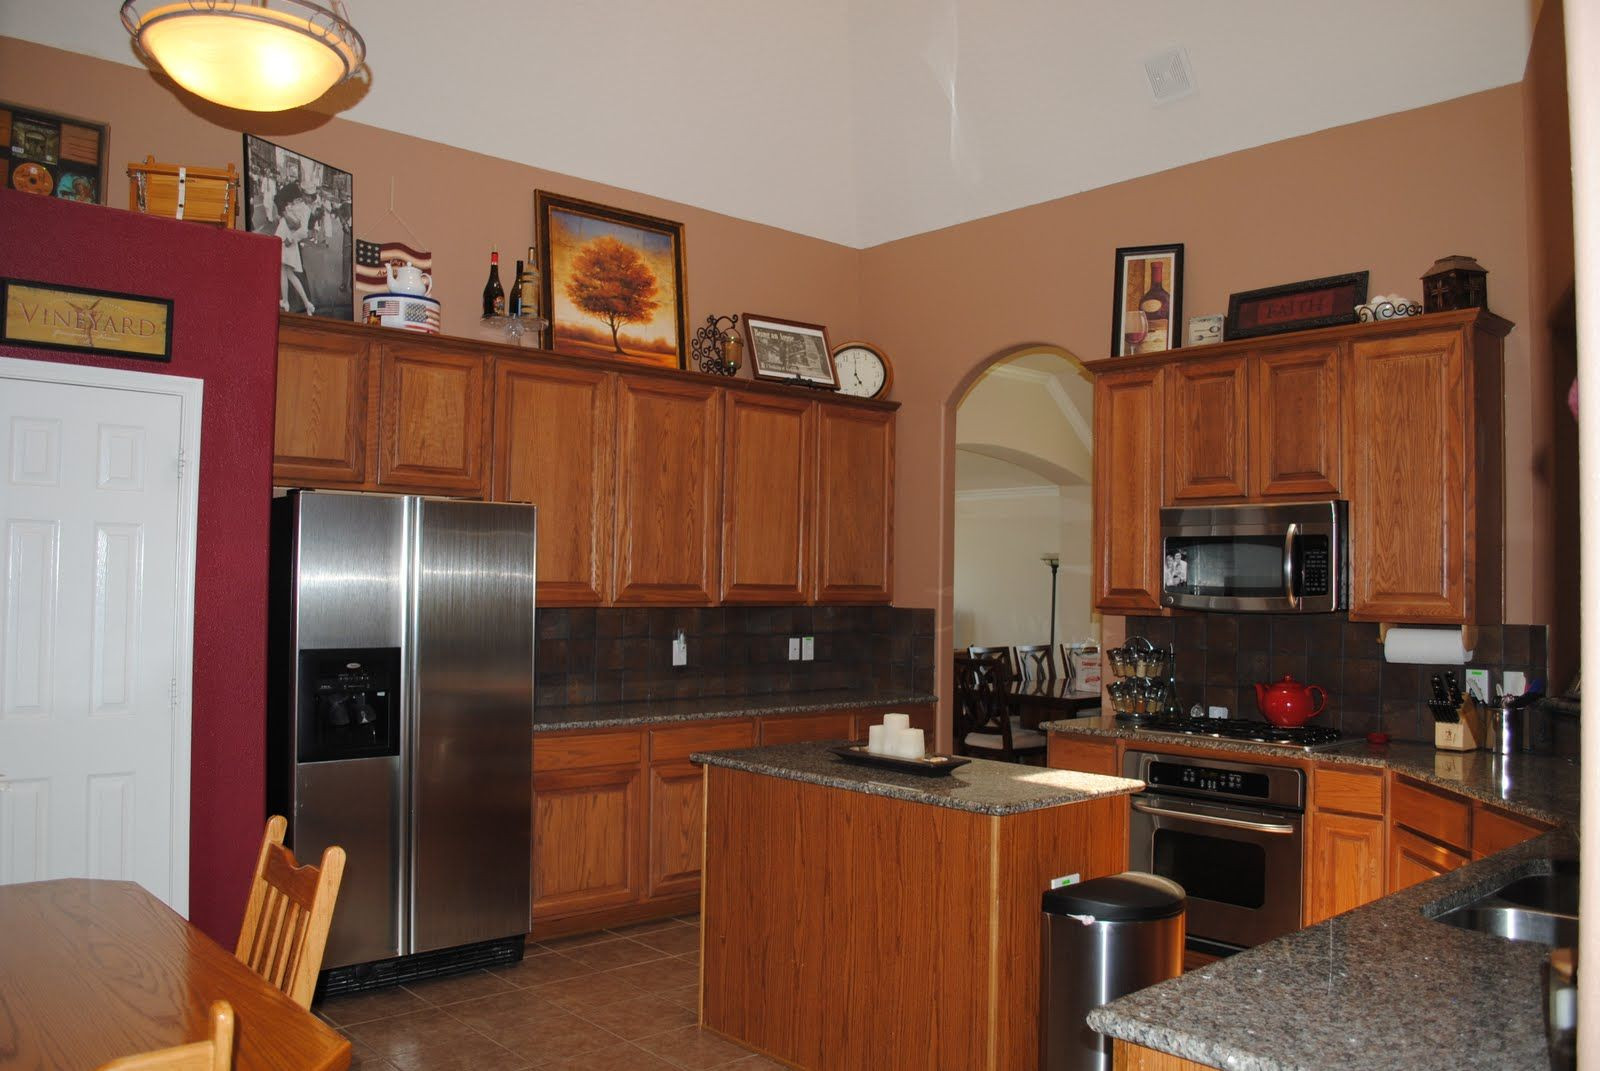 Tan Kitchen Walls
 Accent Paint Colors In Kitchen